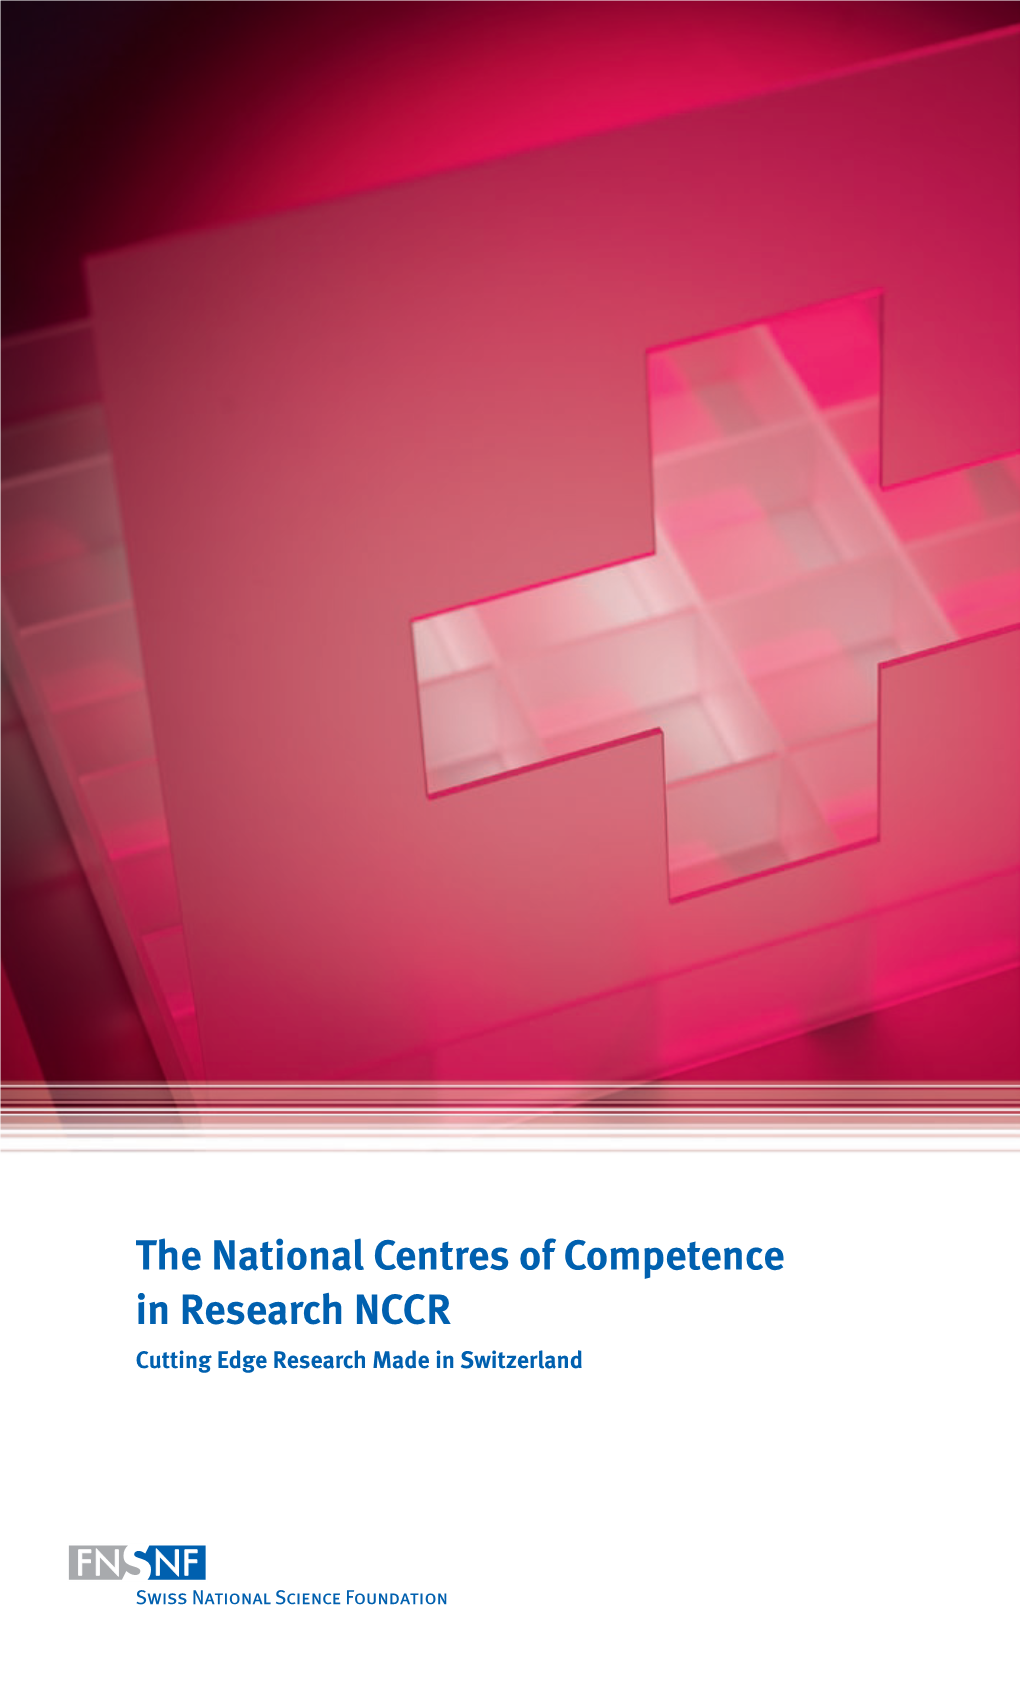 The National Centres of Competence in Research NCCR